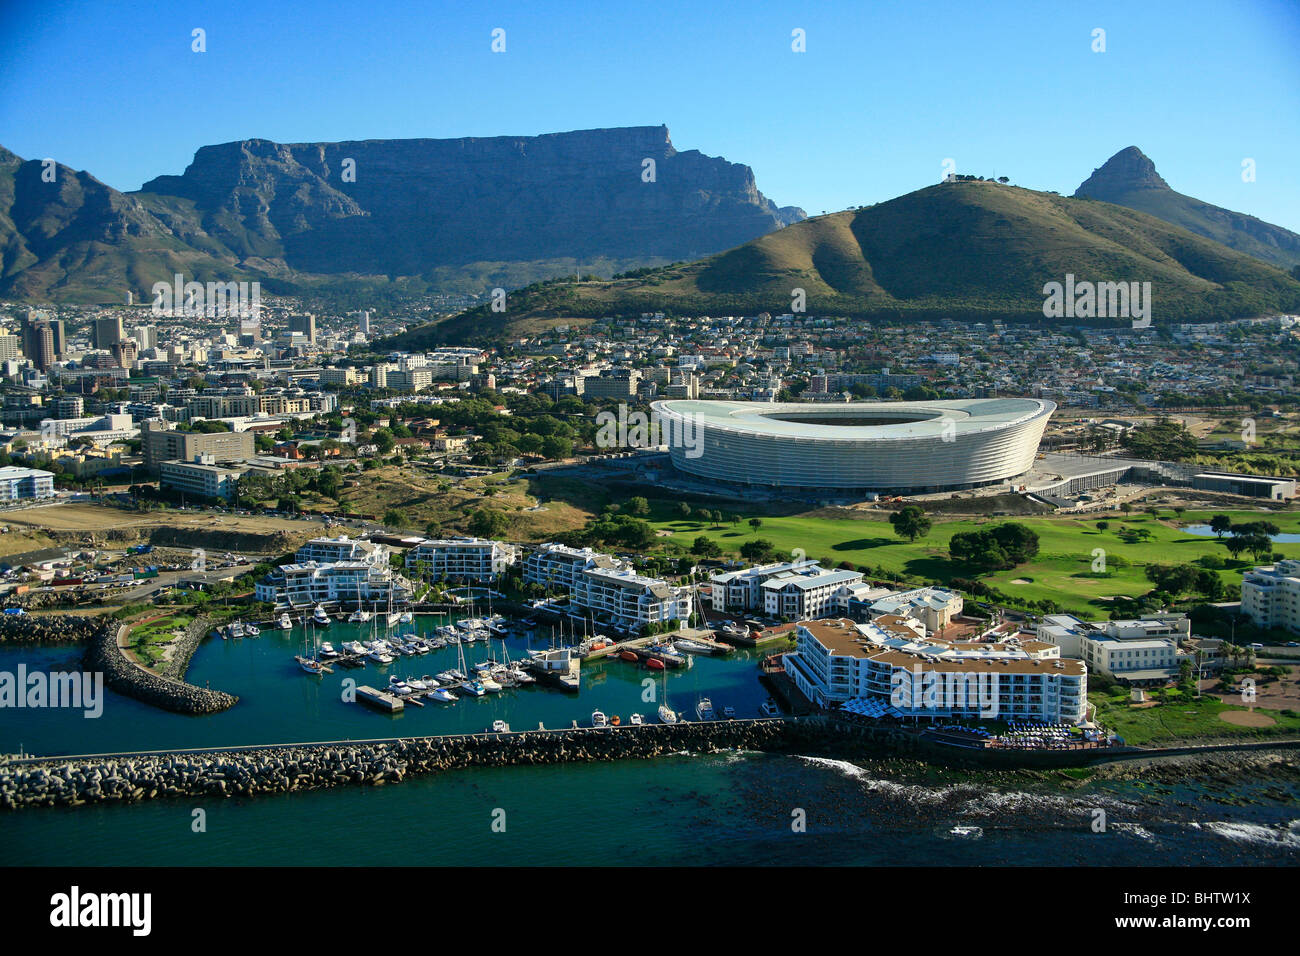 Aerial view of Green Point stadium built for the 2010 Fifa Soccer world cup in Cape Town in 2010 Stock Photo